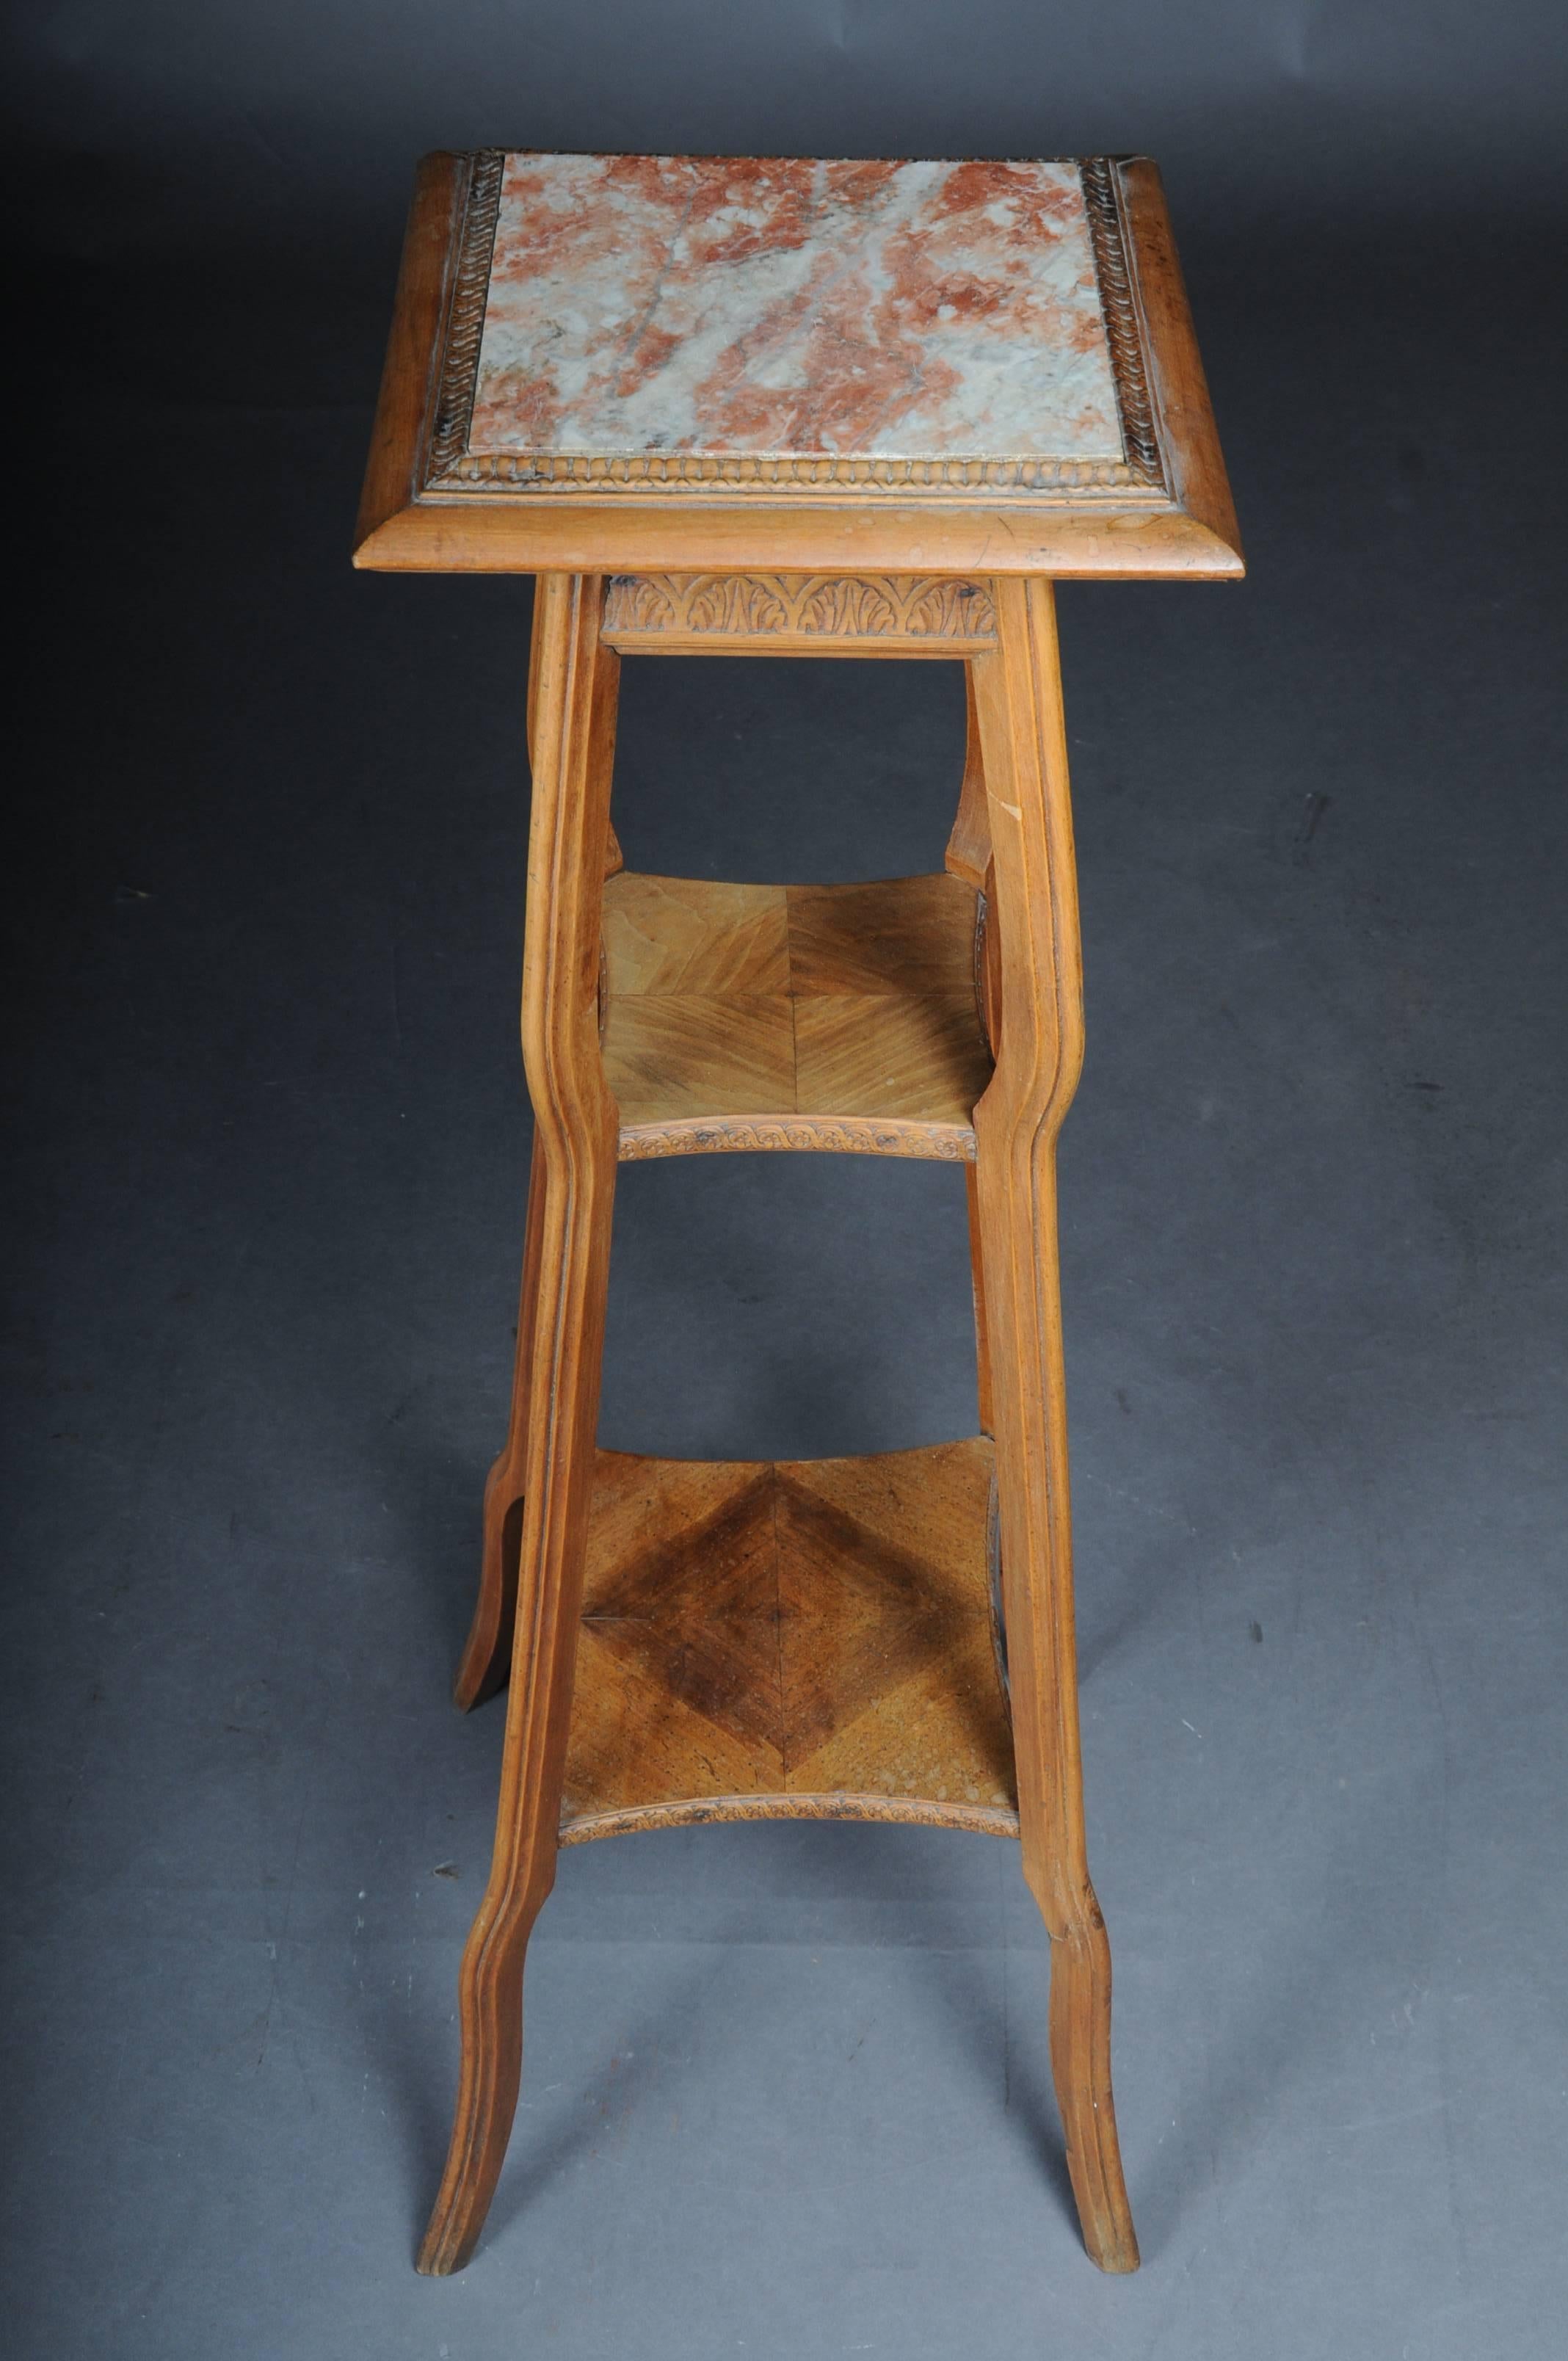 Solid walnut. Extremely Art Nouveau / Art Nouveau flower stand étagerè. Slightly overlapping cover plate marbled. Etagere standing on four filigree legs which extends to the frame of the cover plate.
Extremely elegant and decorative.

(G-71).